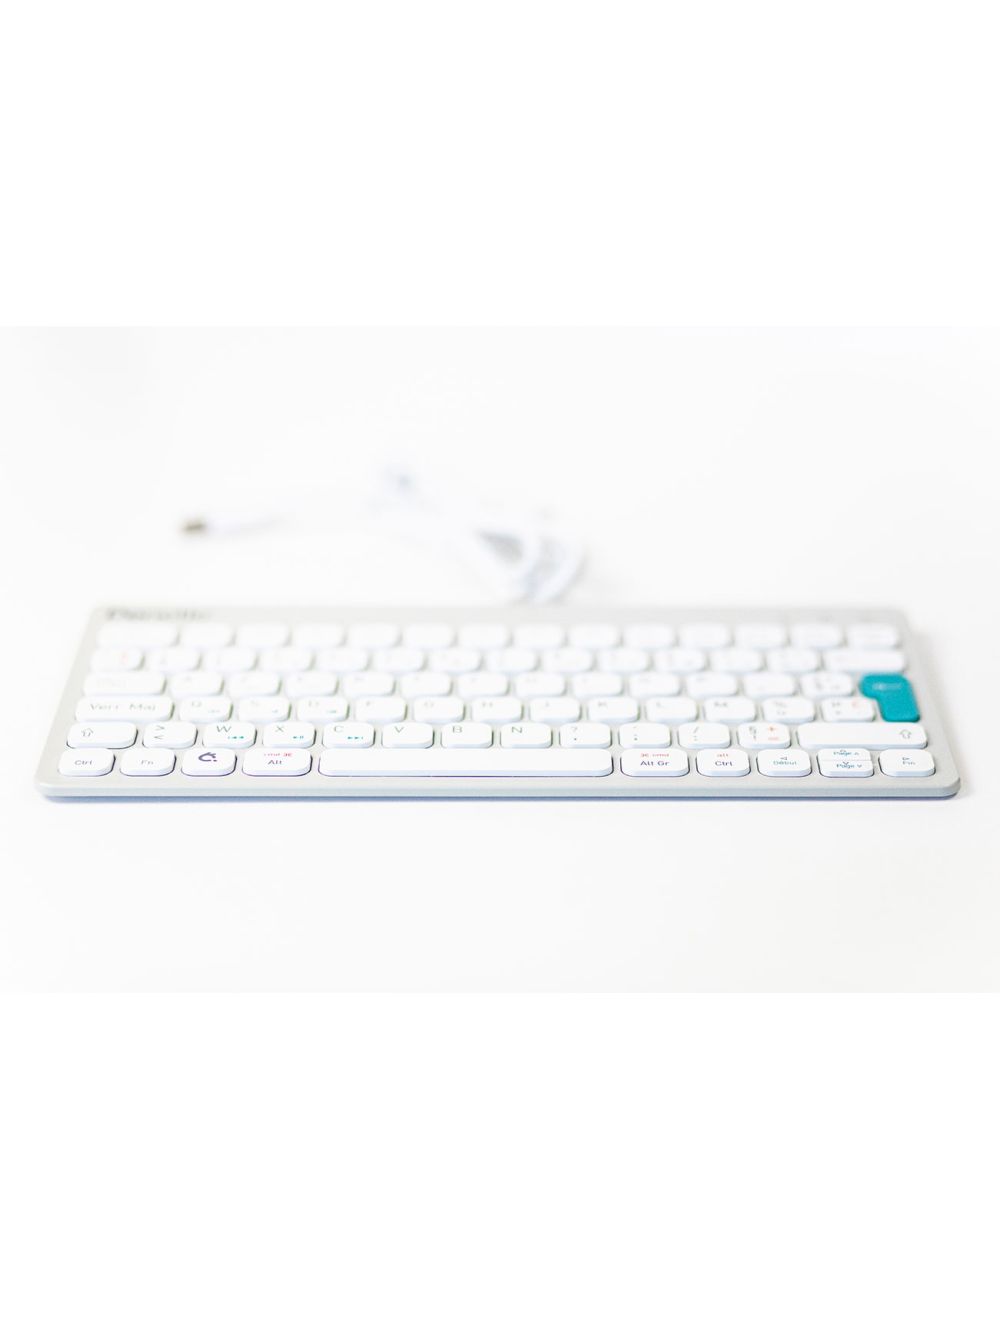 Clavier compact Penclic Filaire C3 Azerty Fr / Bepo Fr